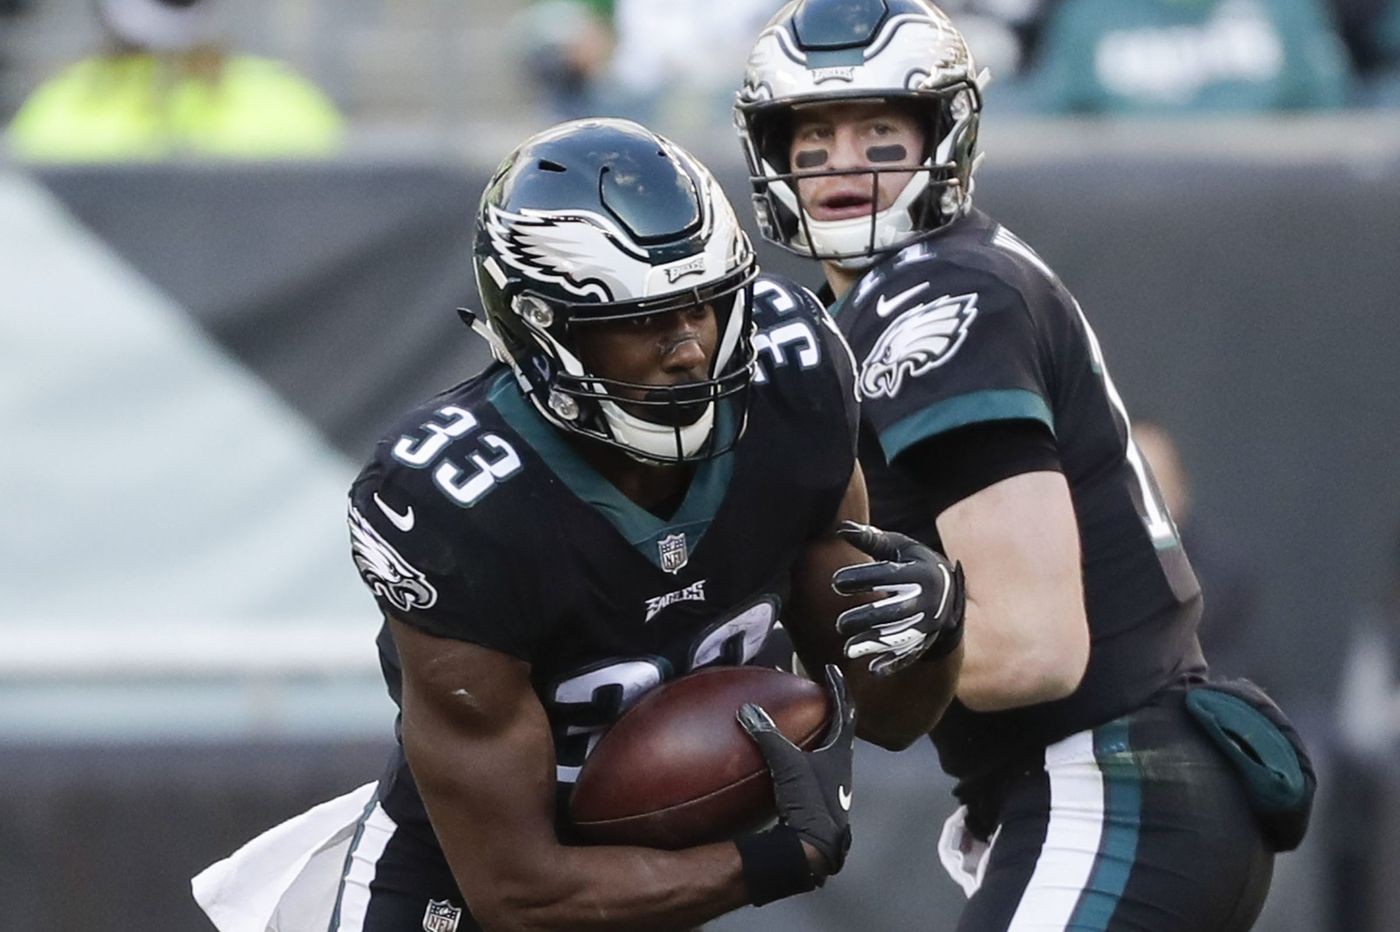 The Josh Adams story: From undrafted rookie to Eagles’ No. 1 running back